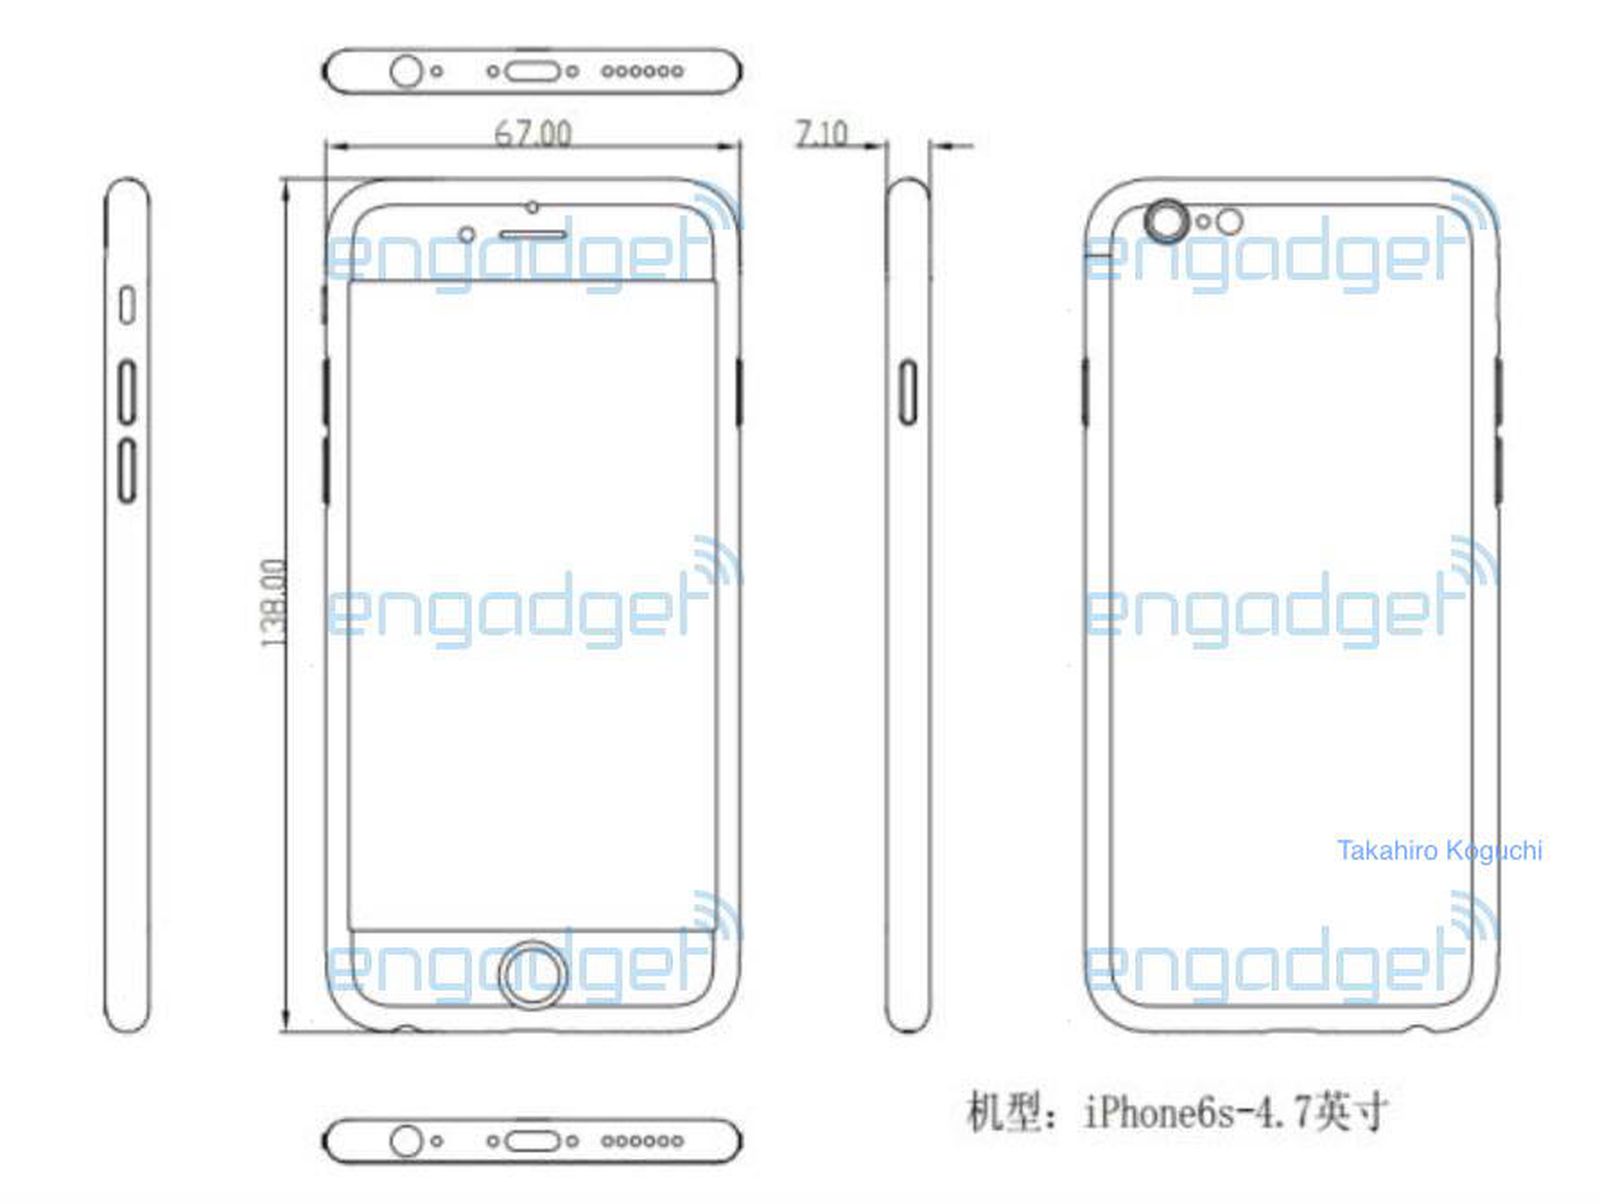 Purported Schematic Suggests Iphone 6s